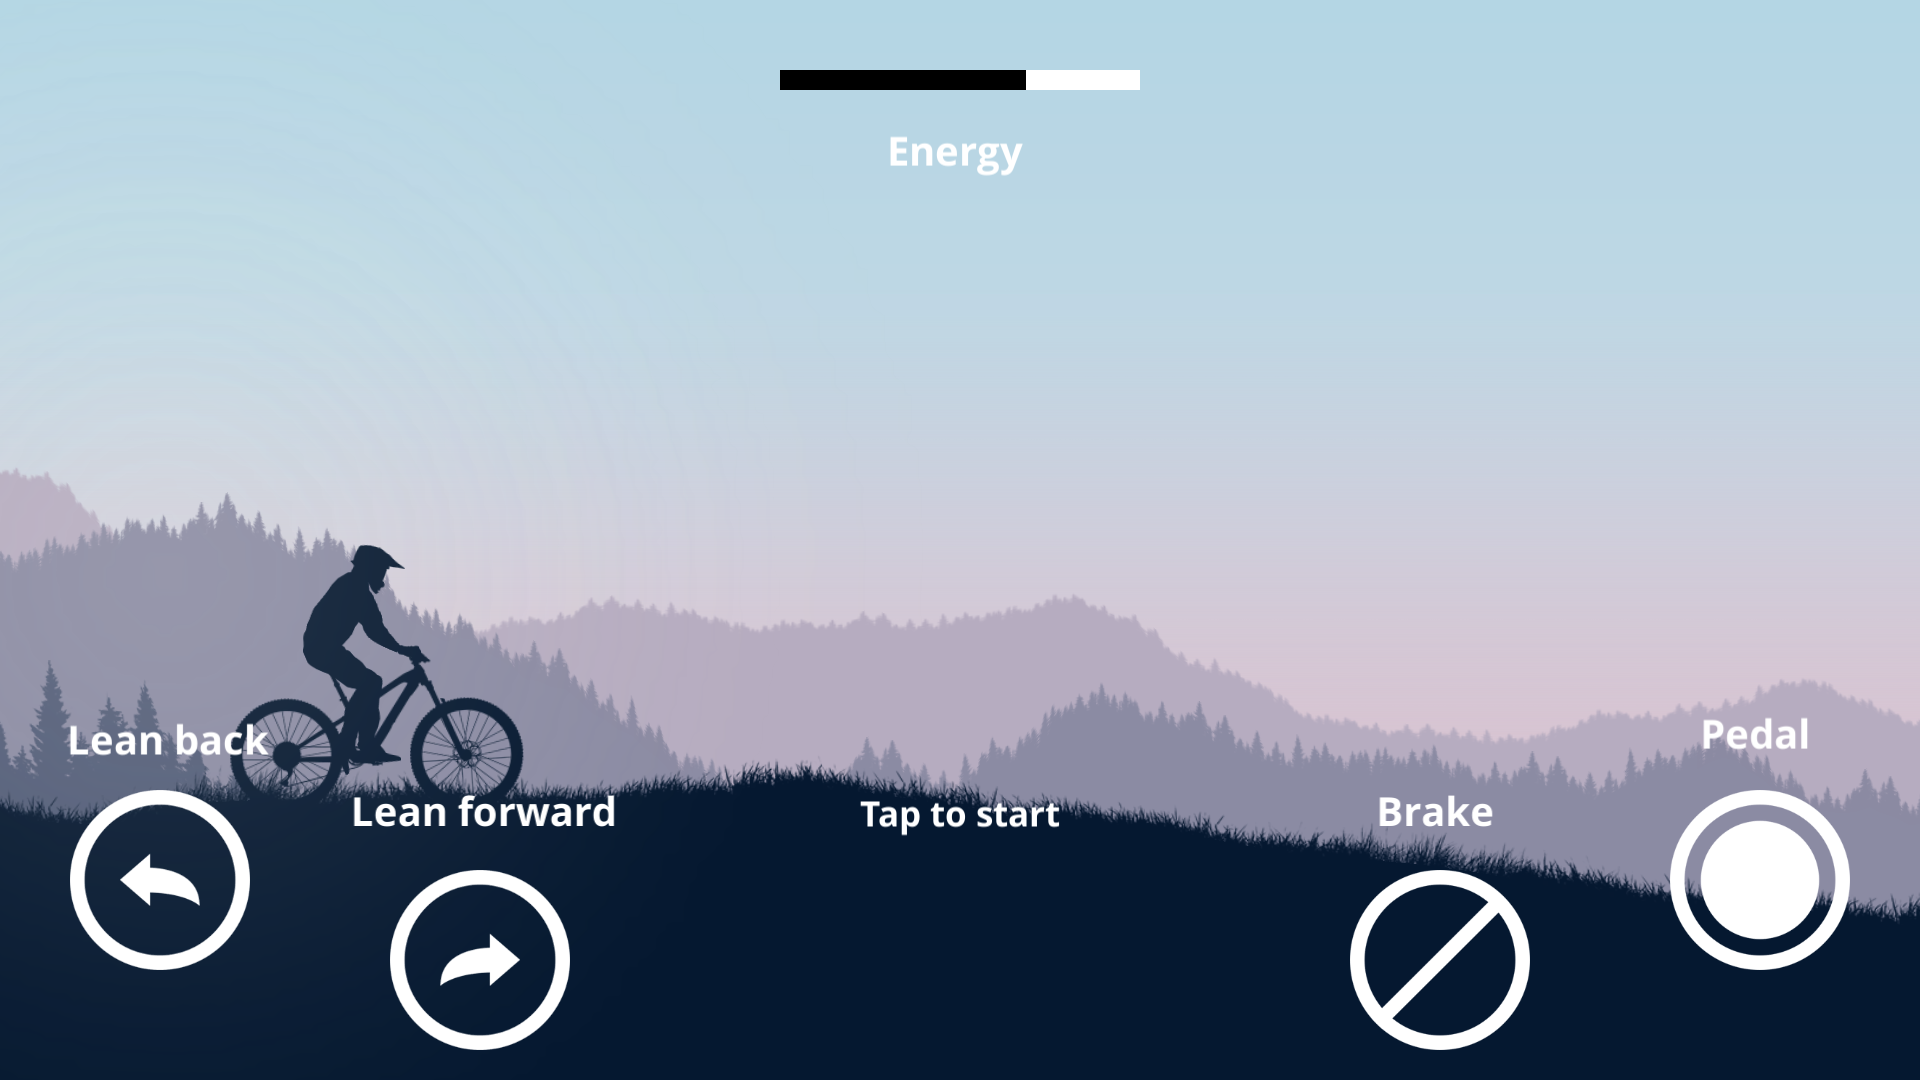 Mountain Bike Xtreme for apple download